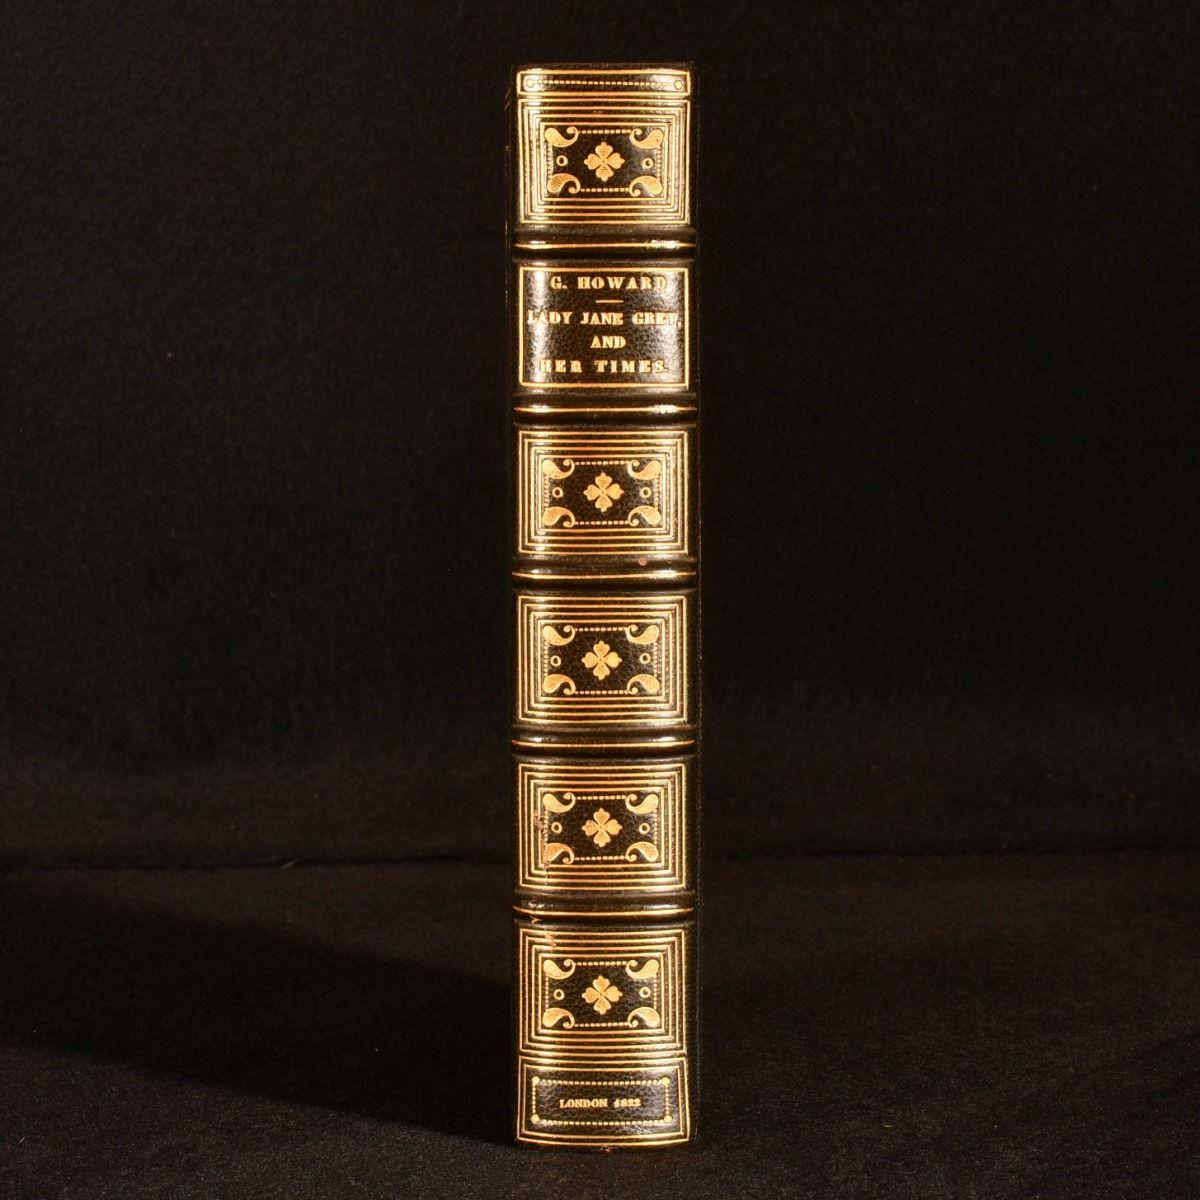 By George Howard. 

A lovely and finely bound first edition work on the Lady Jane Grey and her life and times, a smart extra illustrated copy with a total of thirty-three plates.

The first edition of this uncommon work.

Finely bound by Taffin